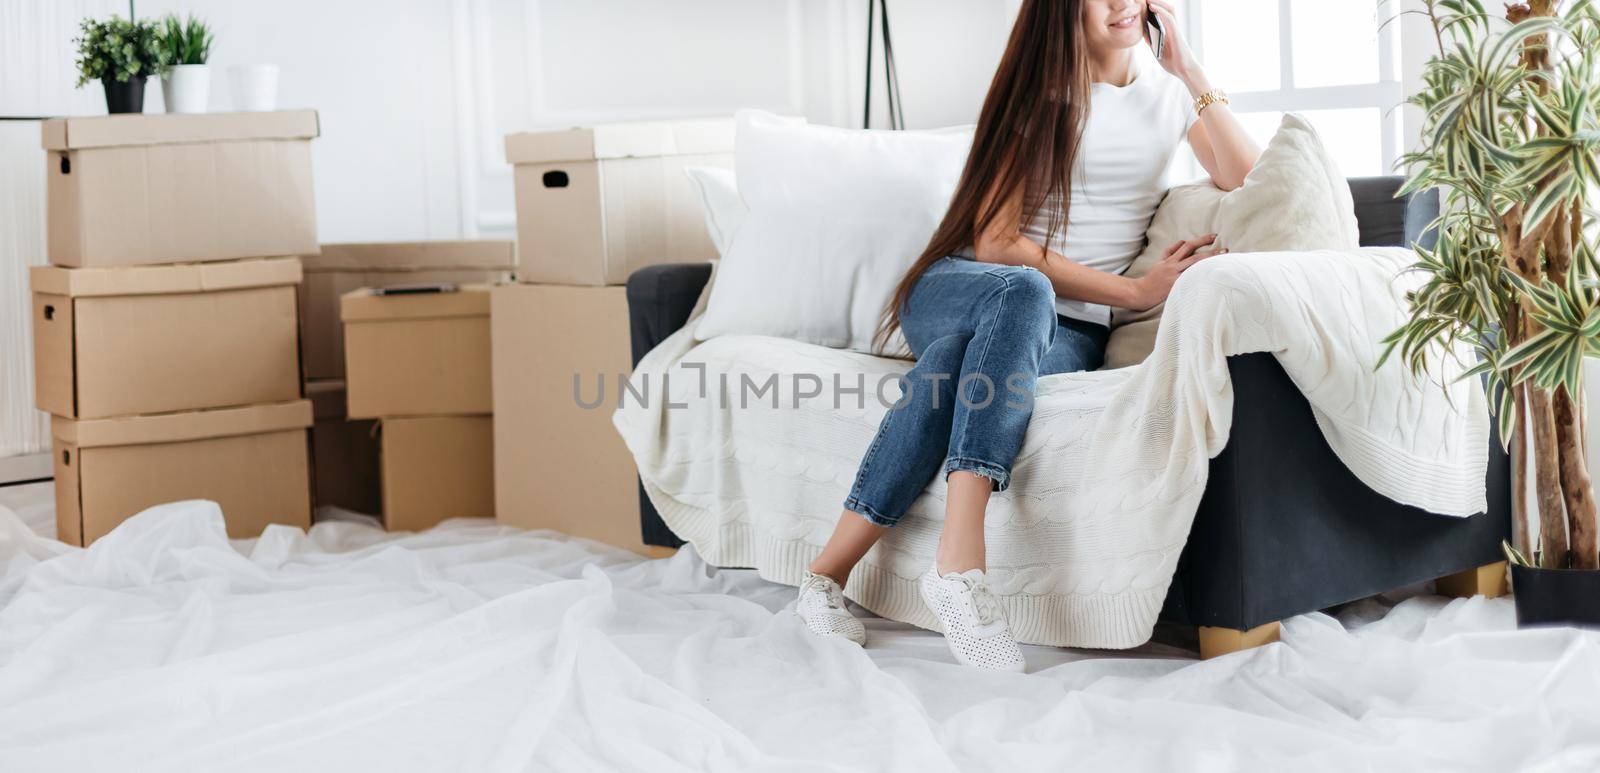 young woman making an order on her smartphone in a new apartment by SmartPhotoLab